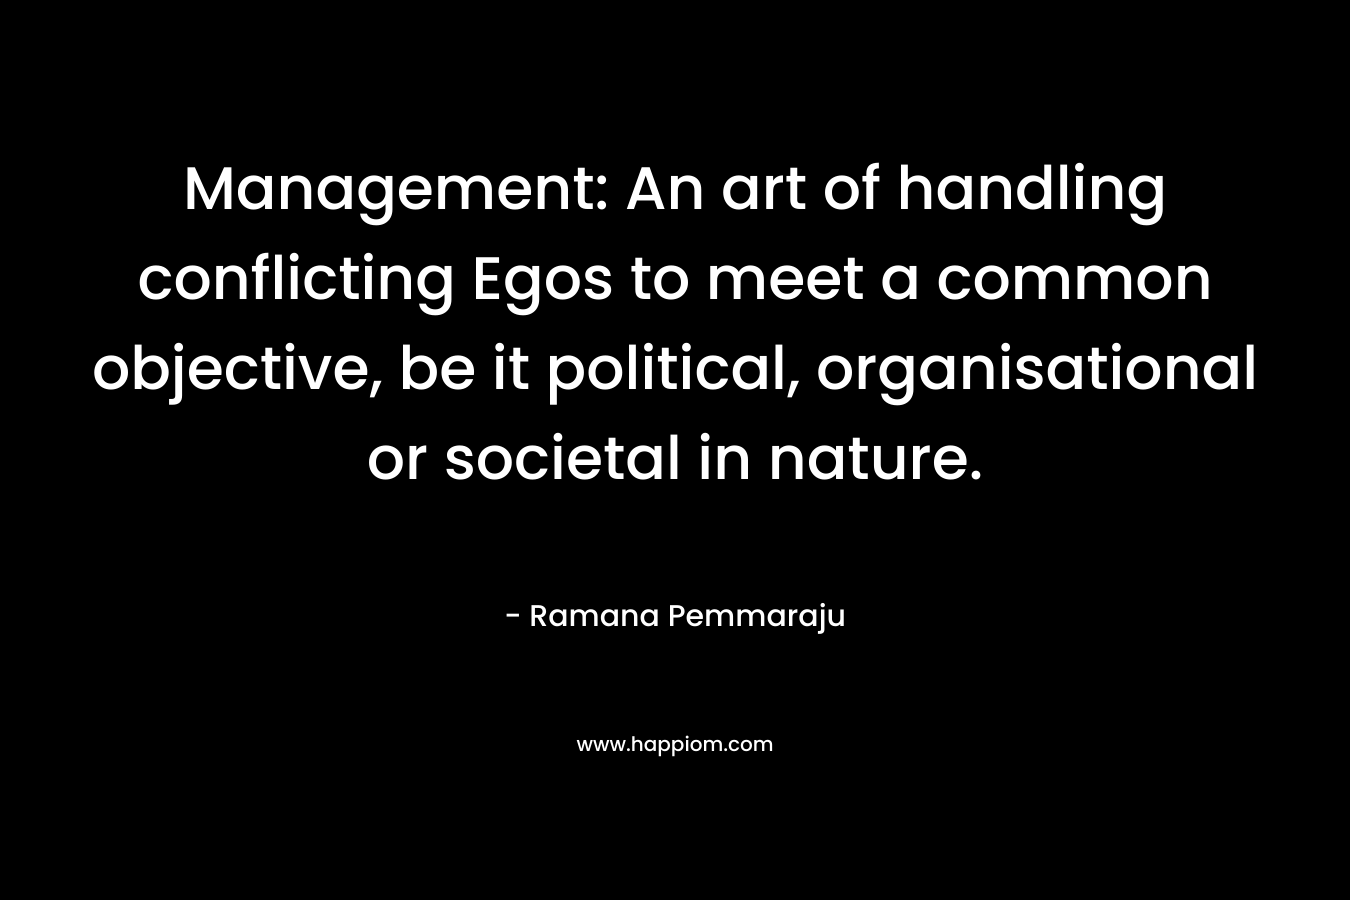 Management: An art of handling conflicting Egos to meet a common objective, be it political, organisational or societal in nature. – Ramana Pemmaraju